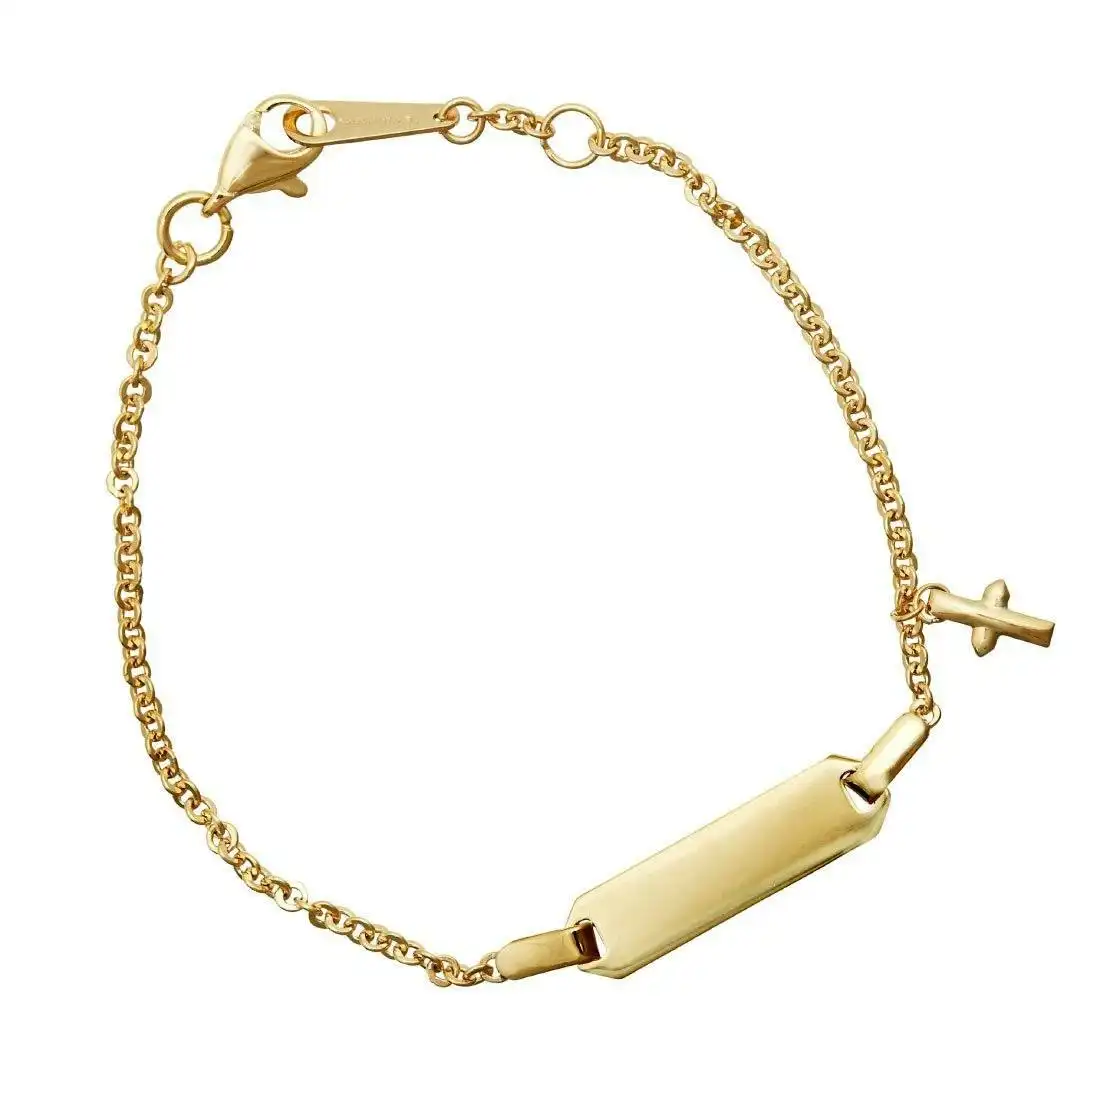 Children's Cross ID Bracelet in 9ct Yellow Gold Silver Infused